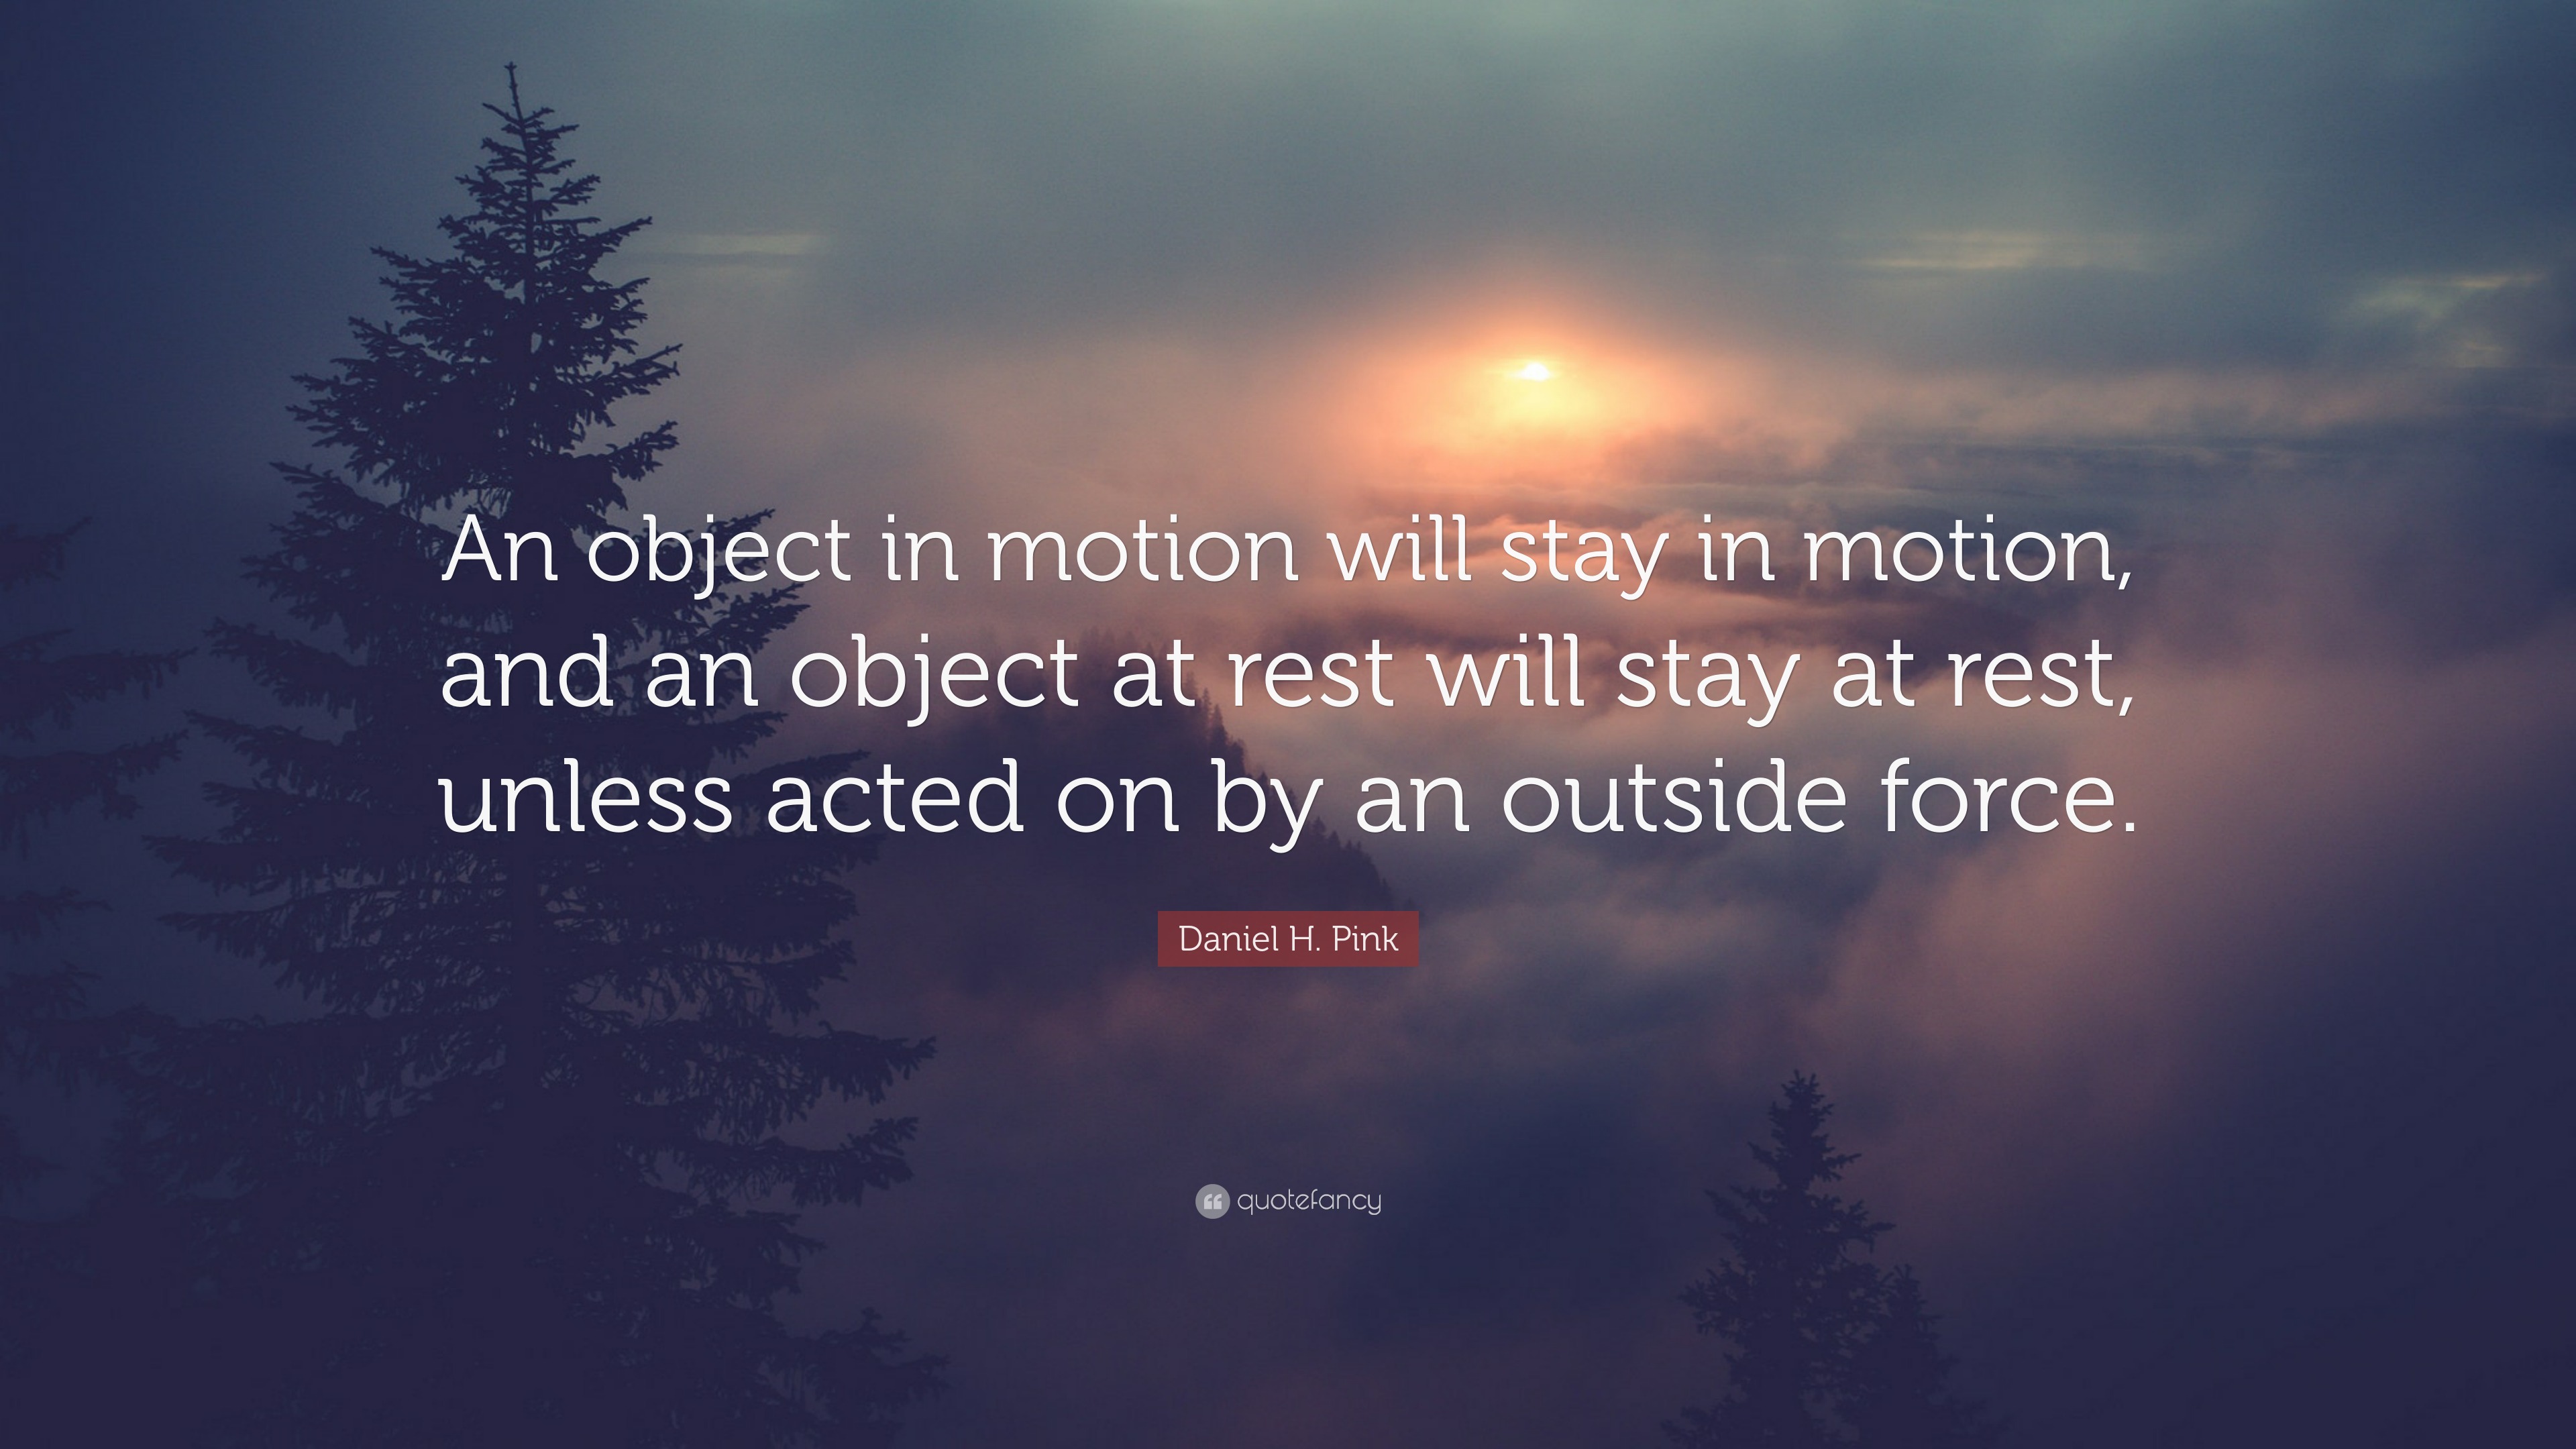 Daniel H. Pink Quote: “An object in motion will stay in motion